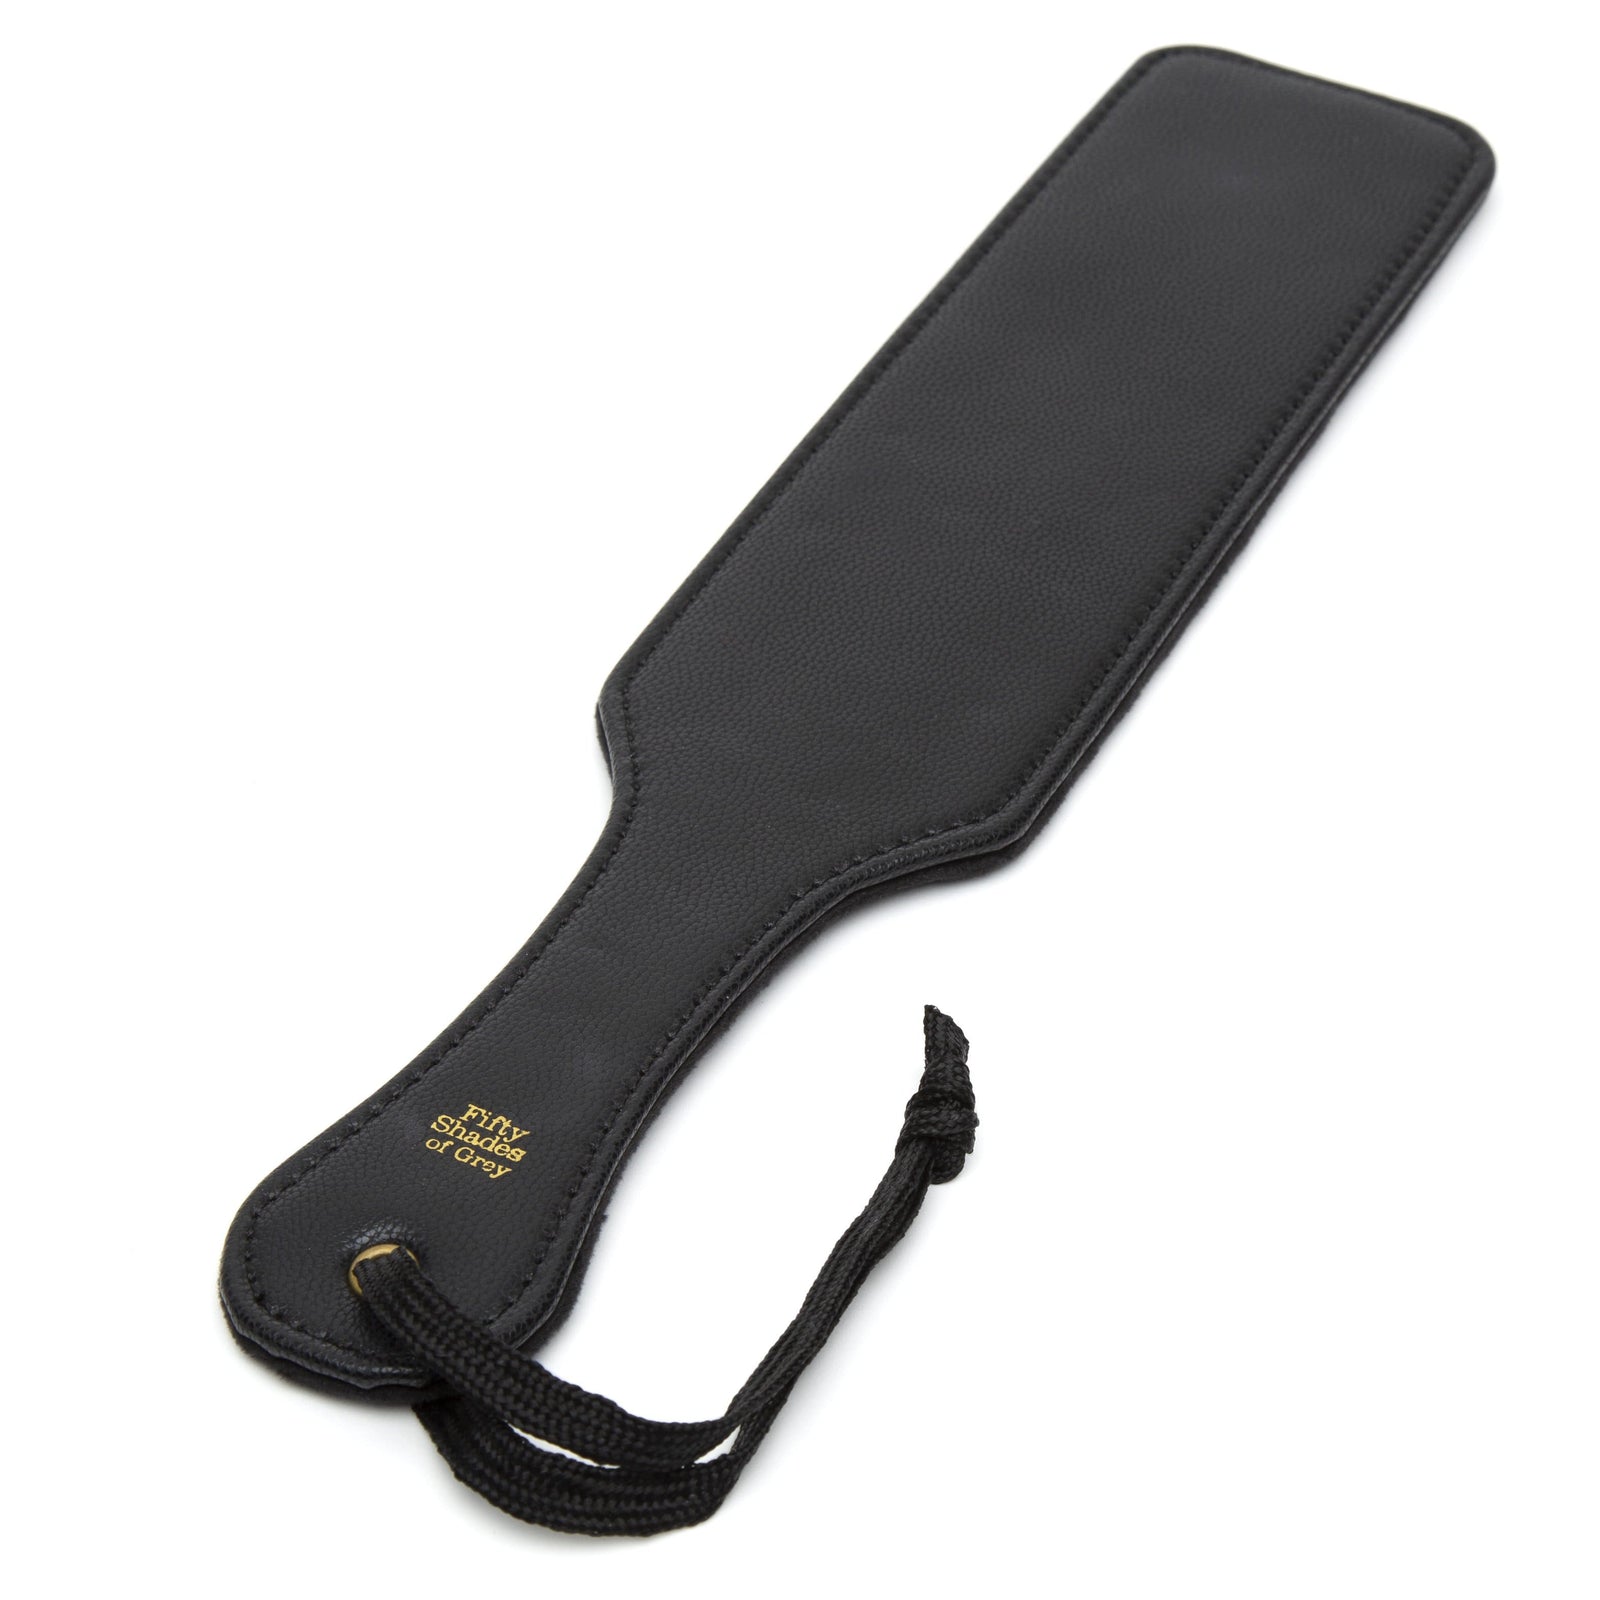 Fifty Shades of Grey - Bound to You Paddle (Black) Paddle 319728531 CherryAffairs